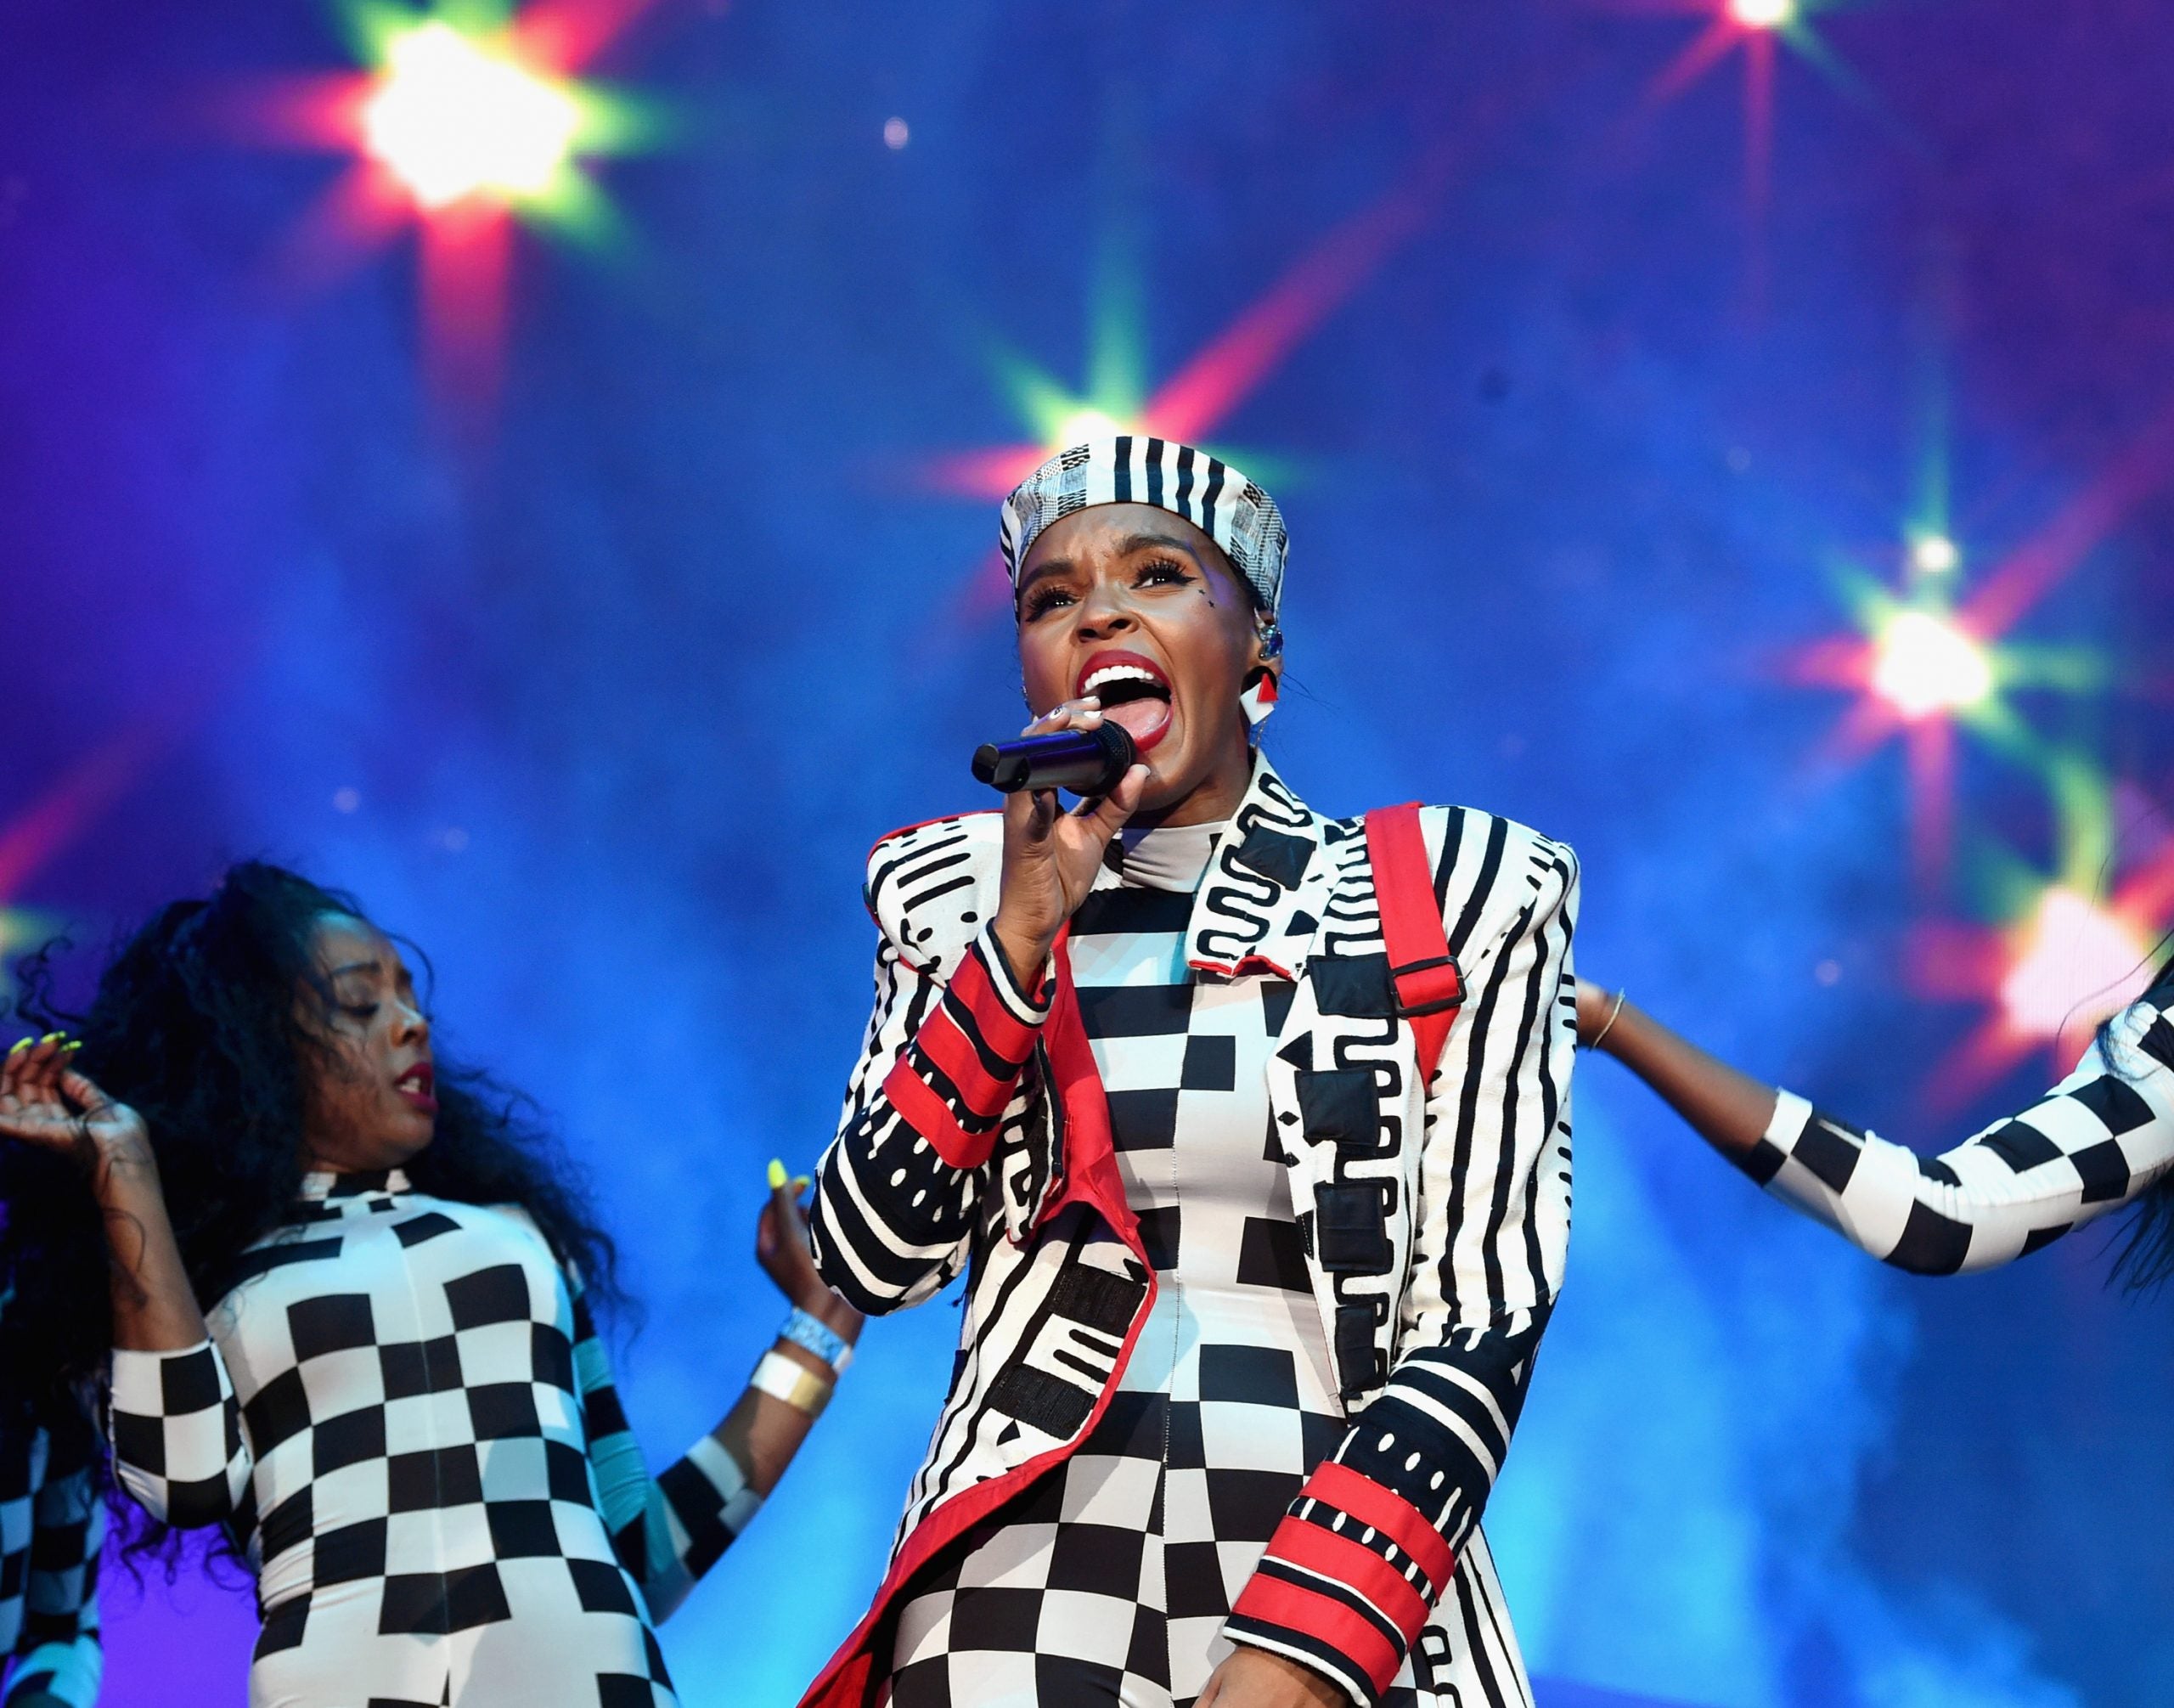 Janelle Monáe On Embracing Her Limits and Staying Free